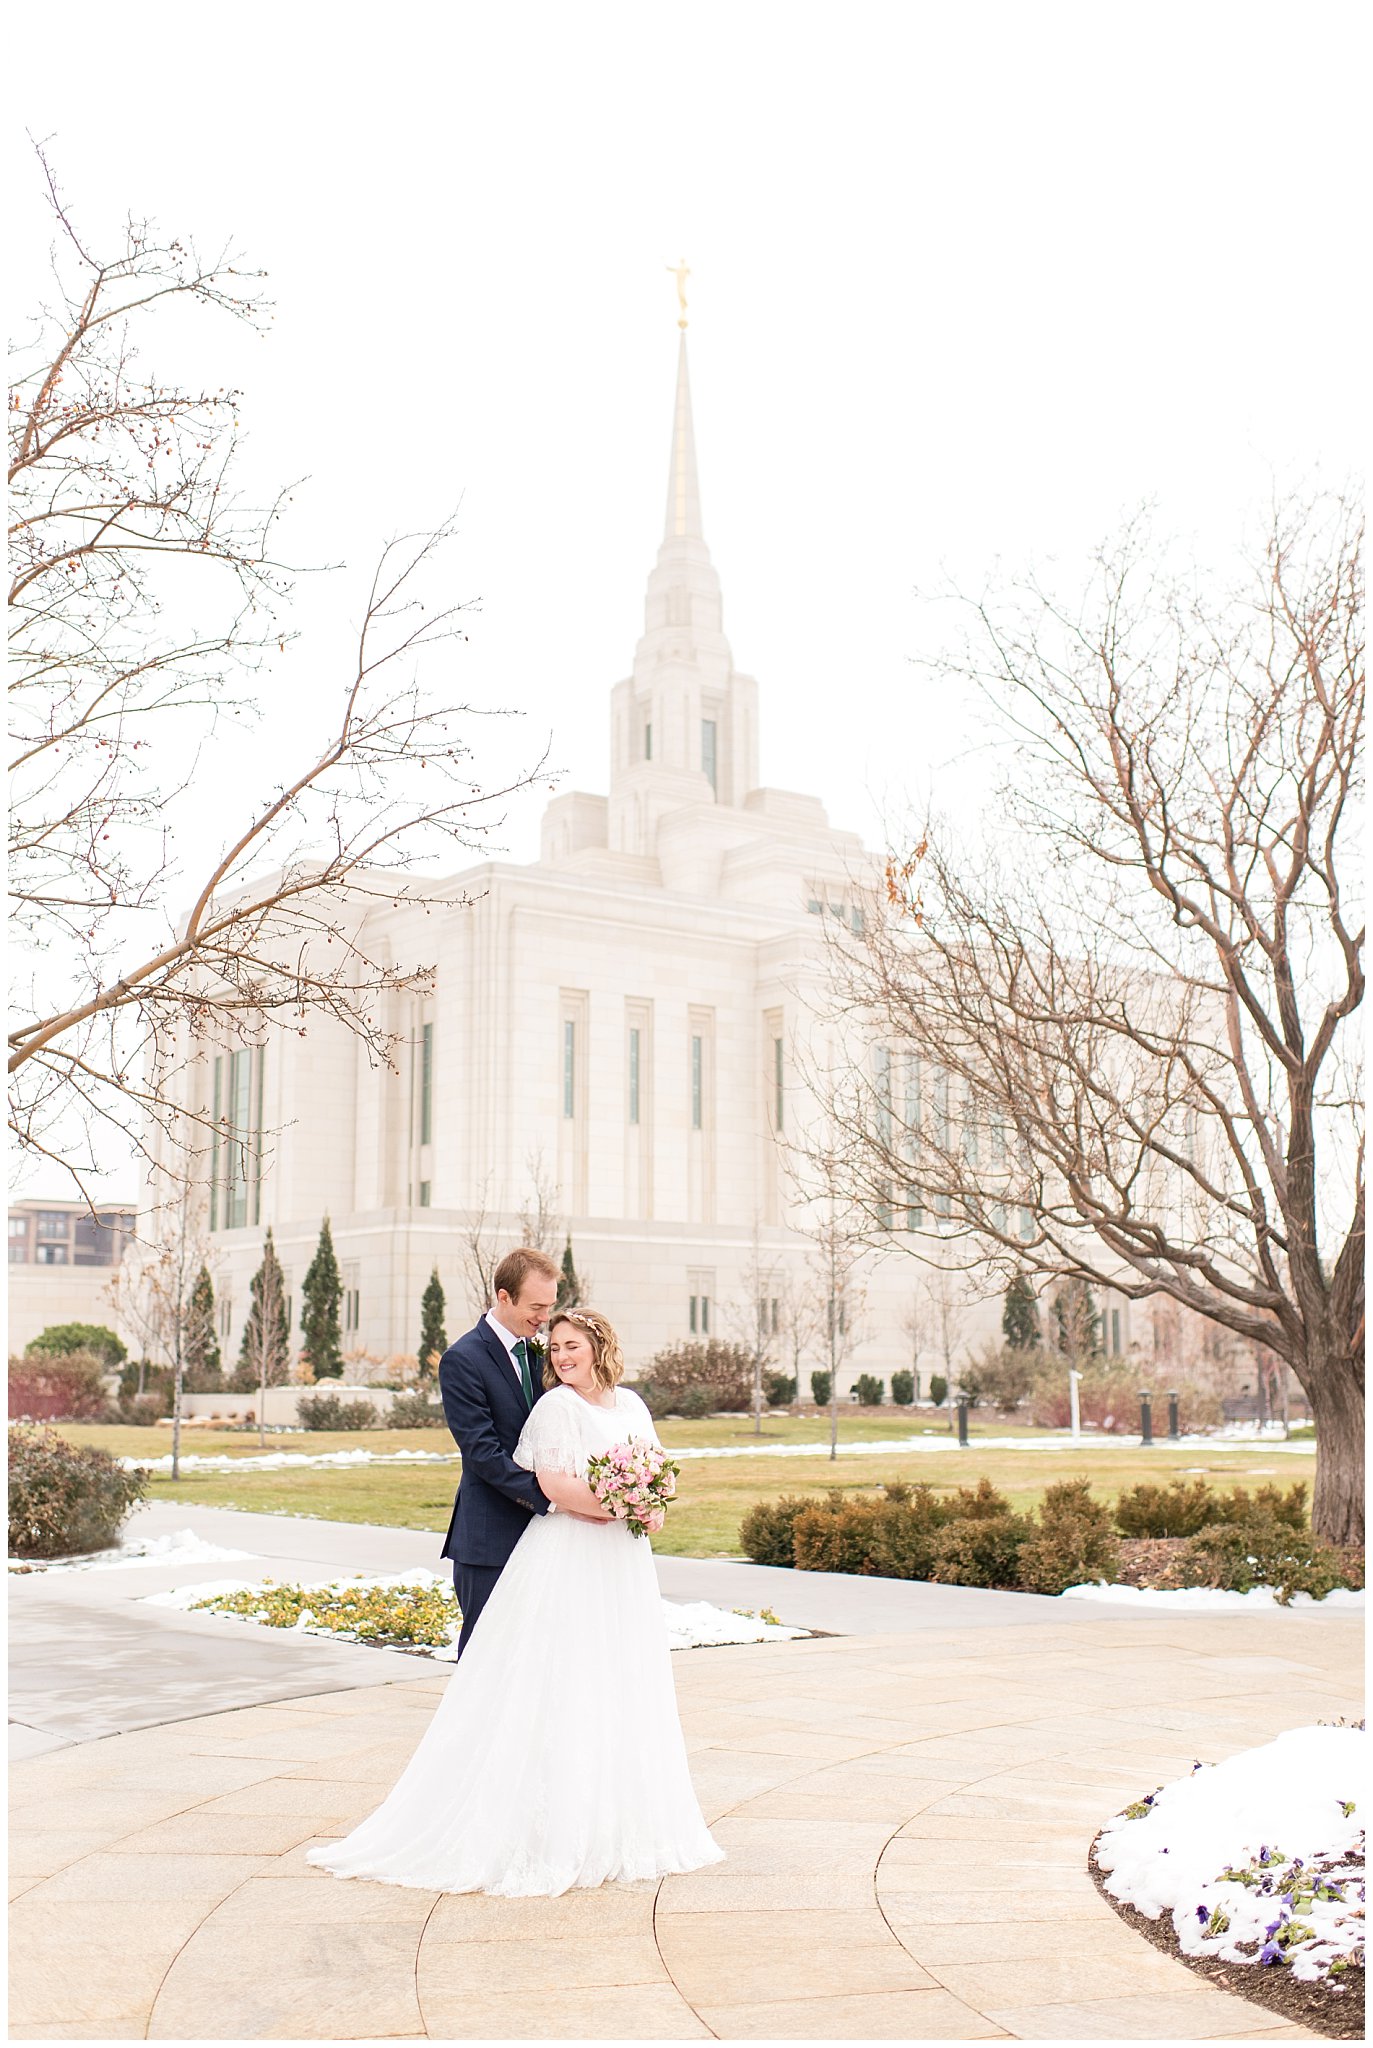 Ogden LDS Temple Wedding | Bride and groom in front of temple | Jessie and Dallin Photography